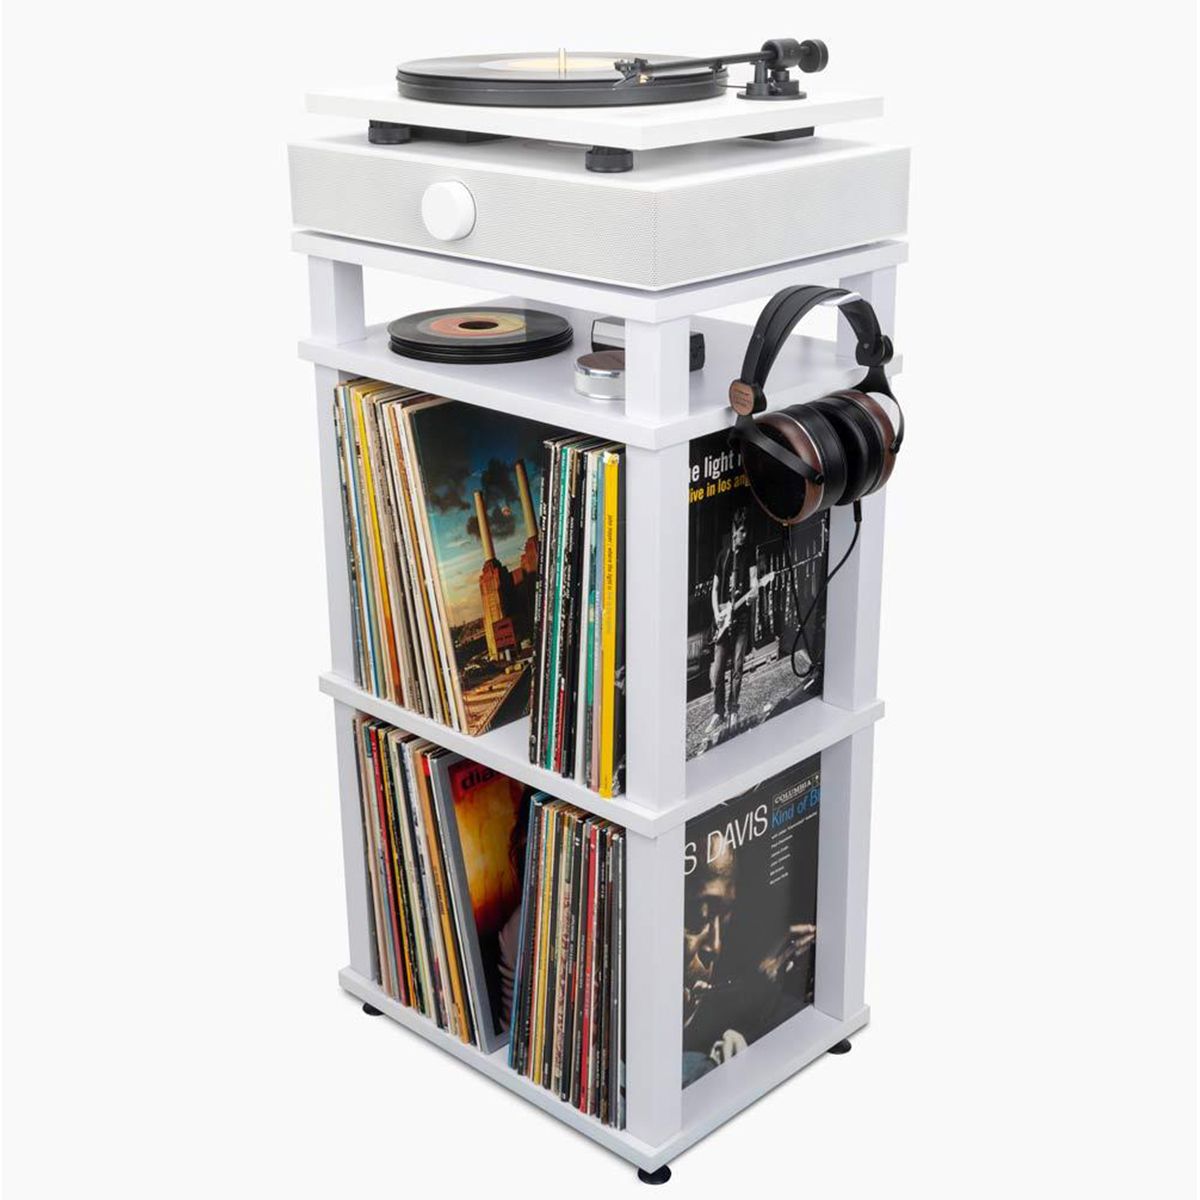 SpinStand Audio Component & Record Rack
